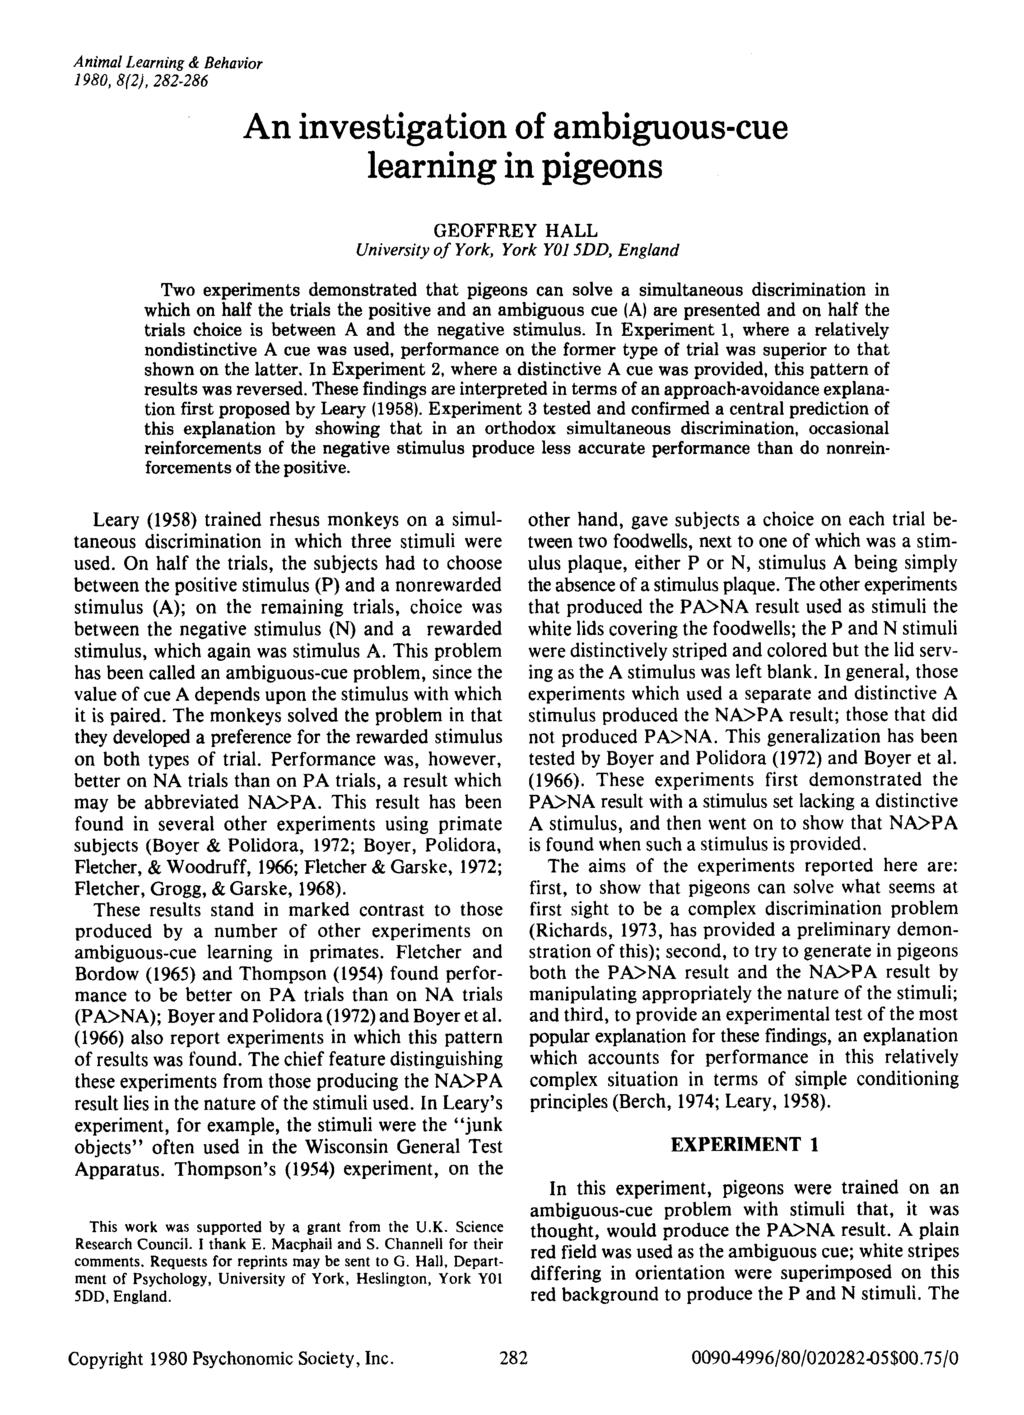 Animal Learning & Behavior 19808(2)282-286 An investigation of ambigos-ce learning in pigeons GEOFFREY HALL University ofyork York YOJ 5DD England Two experiments demonstrated that pigeons can solve